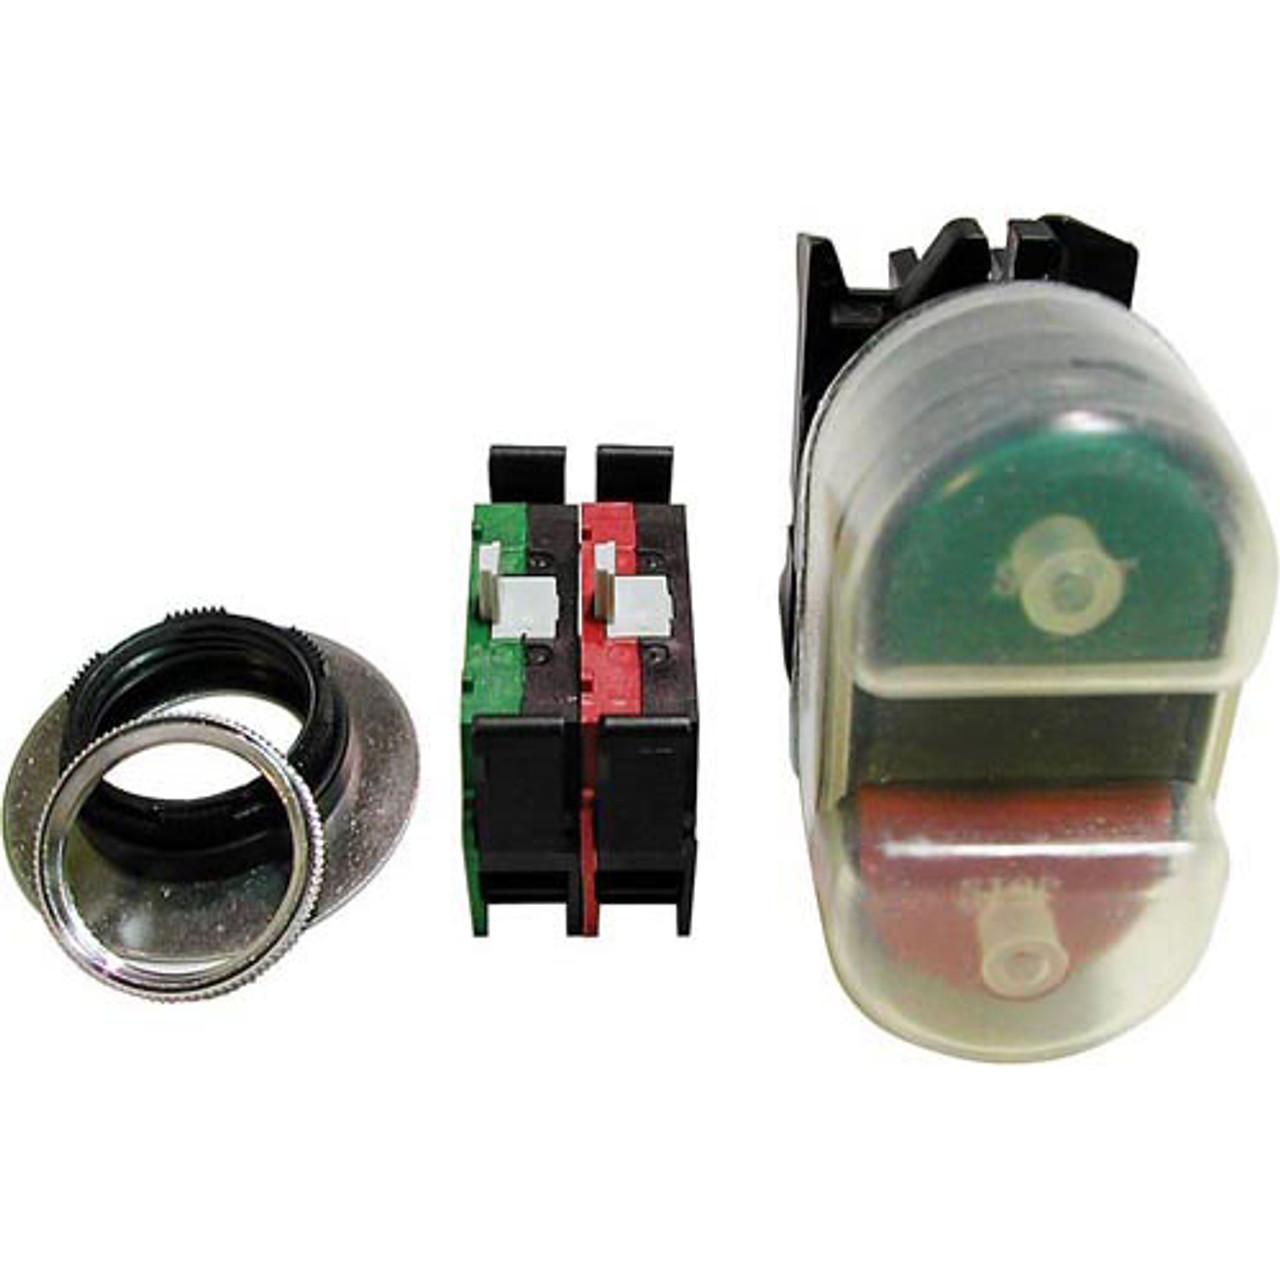 Oval Push Switch Kit - Replacement Part For Berkel 4175-00504